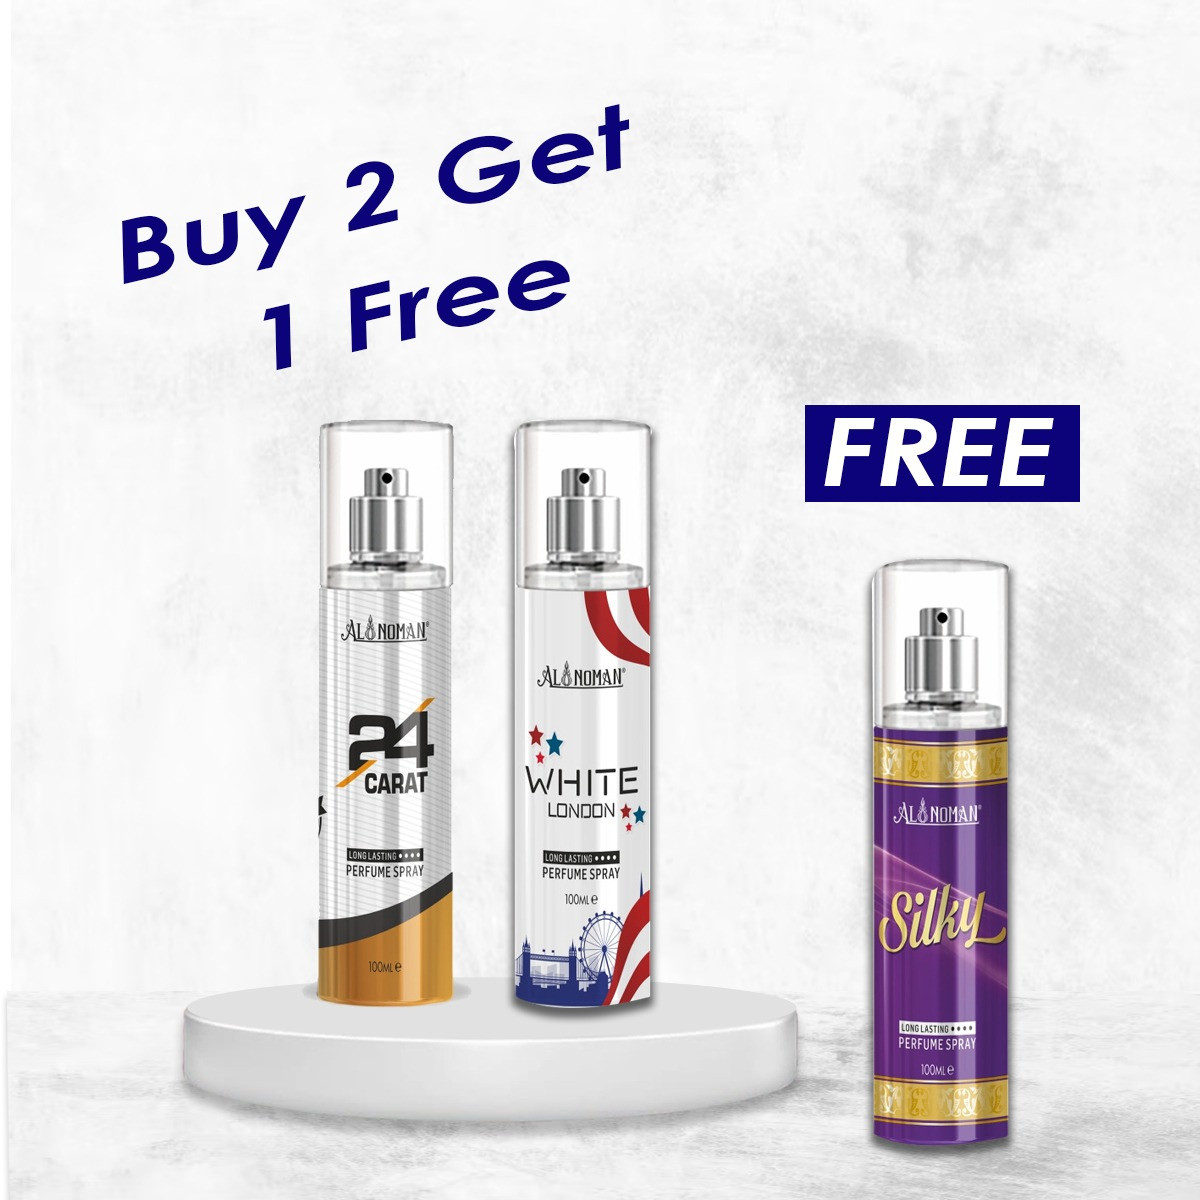 Perfume offer Buy 2 and Get 1 free